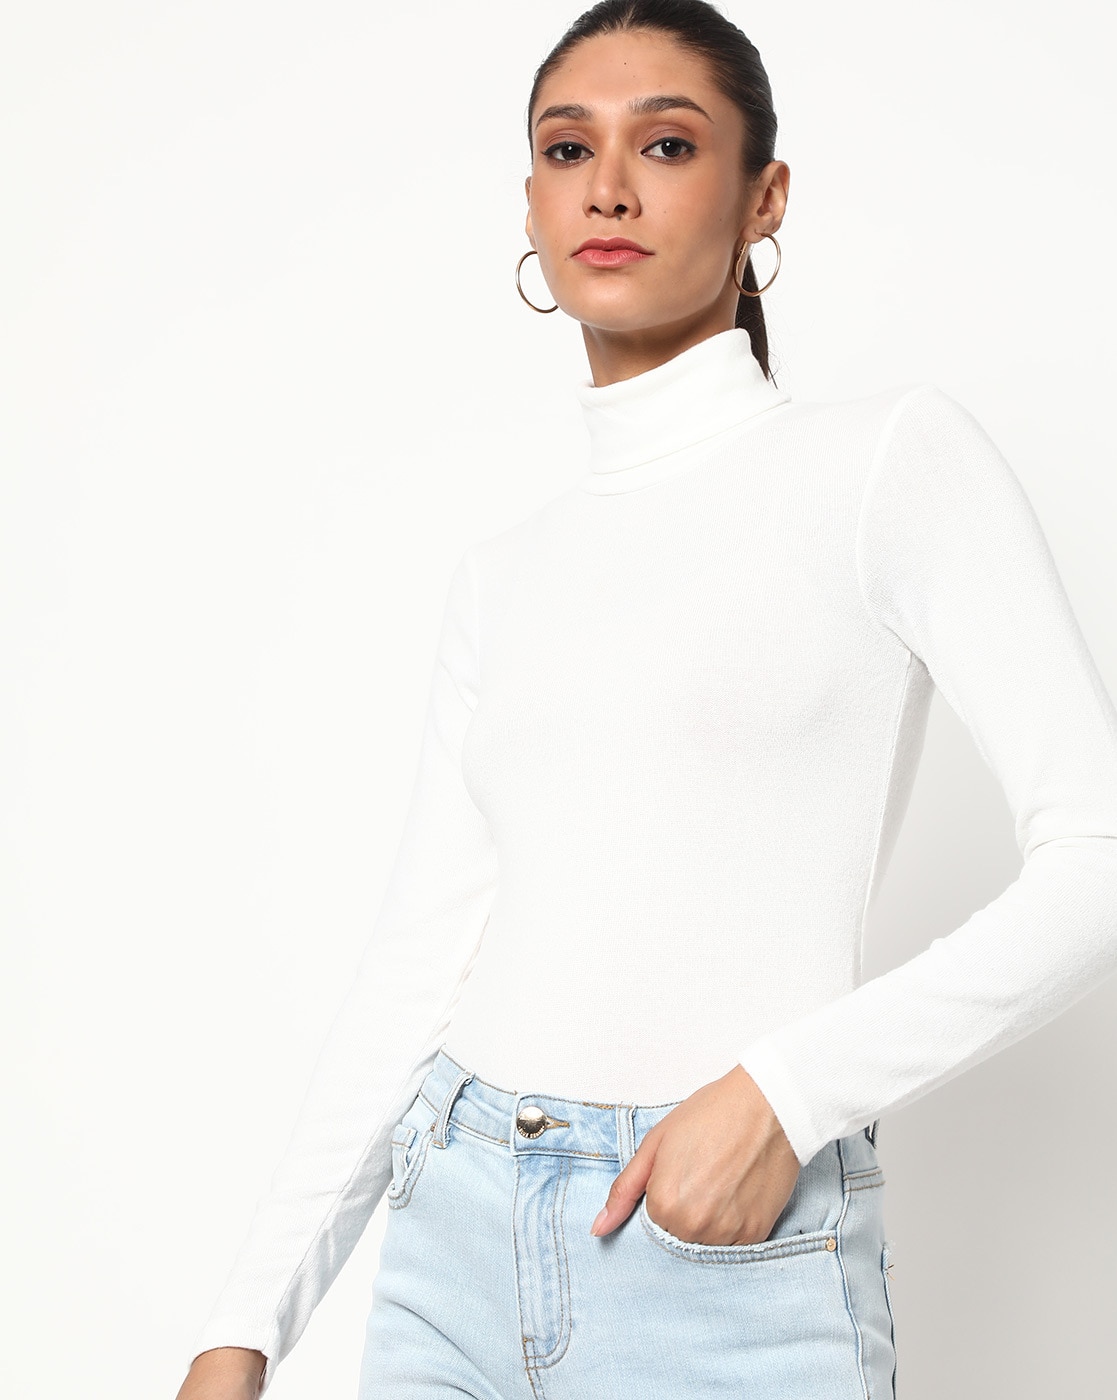 Turtleneck Top with Full Sleeves